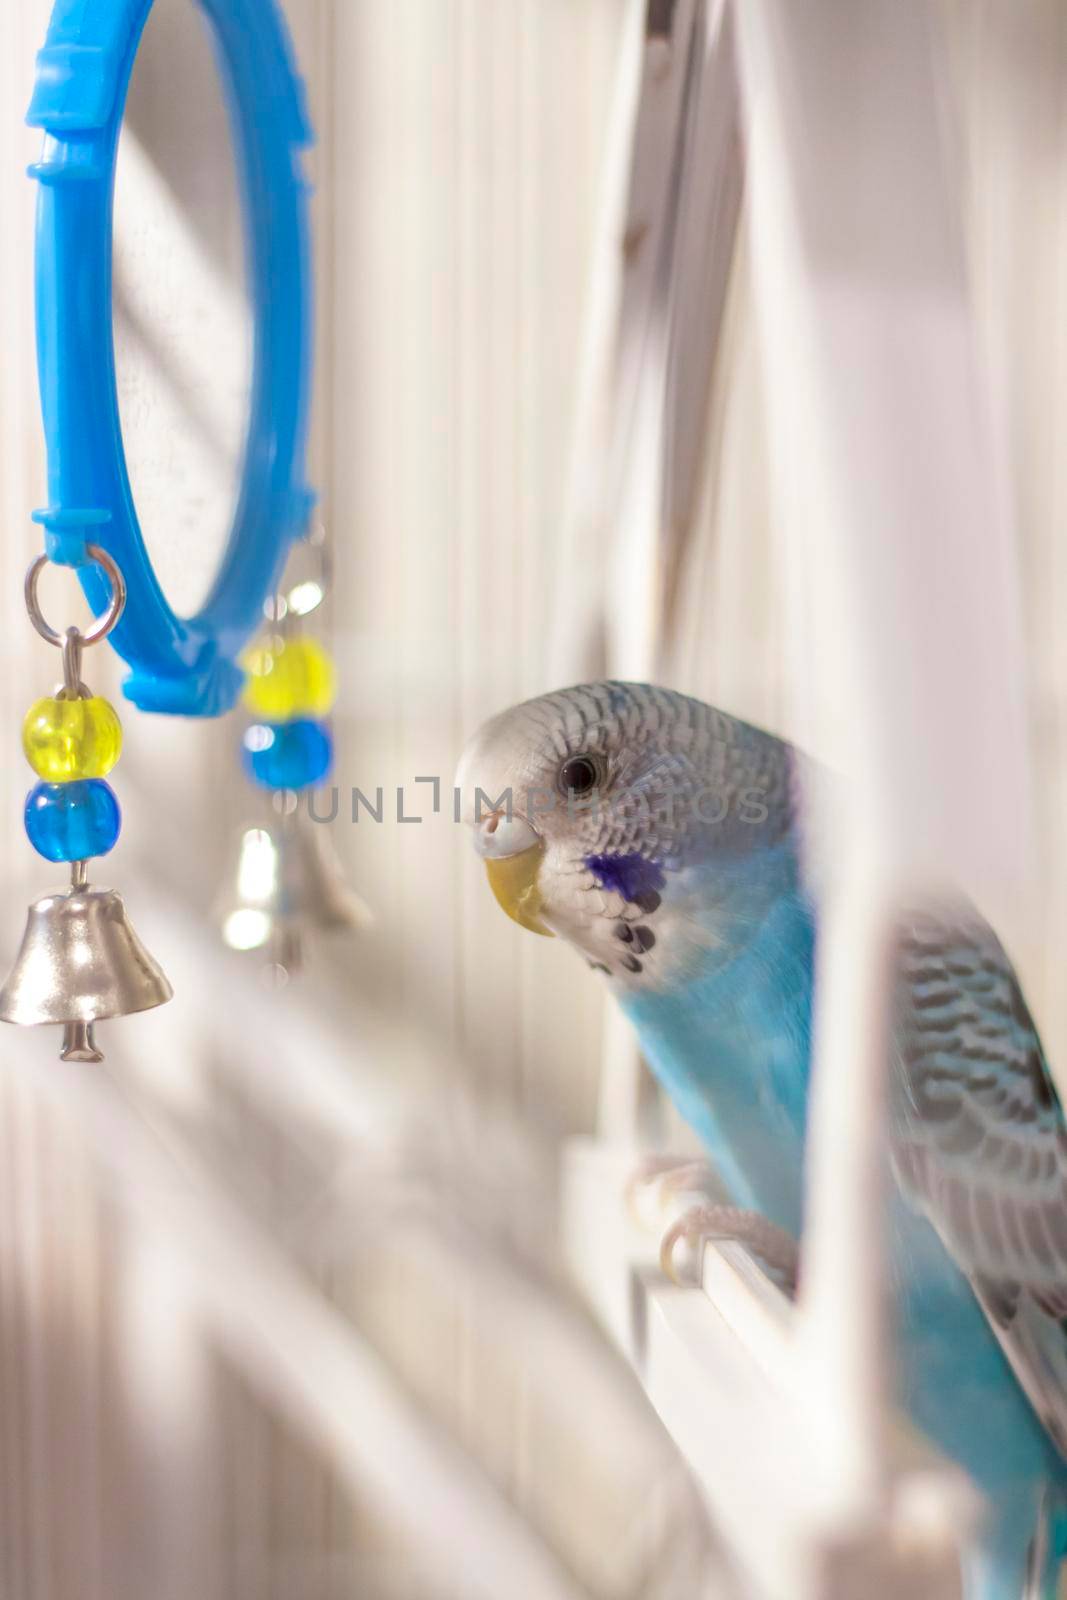 A budgie. A blue budgie sits in a cage. Poultry. by Alina_Lebed